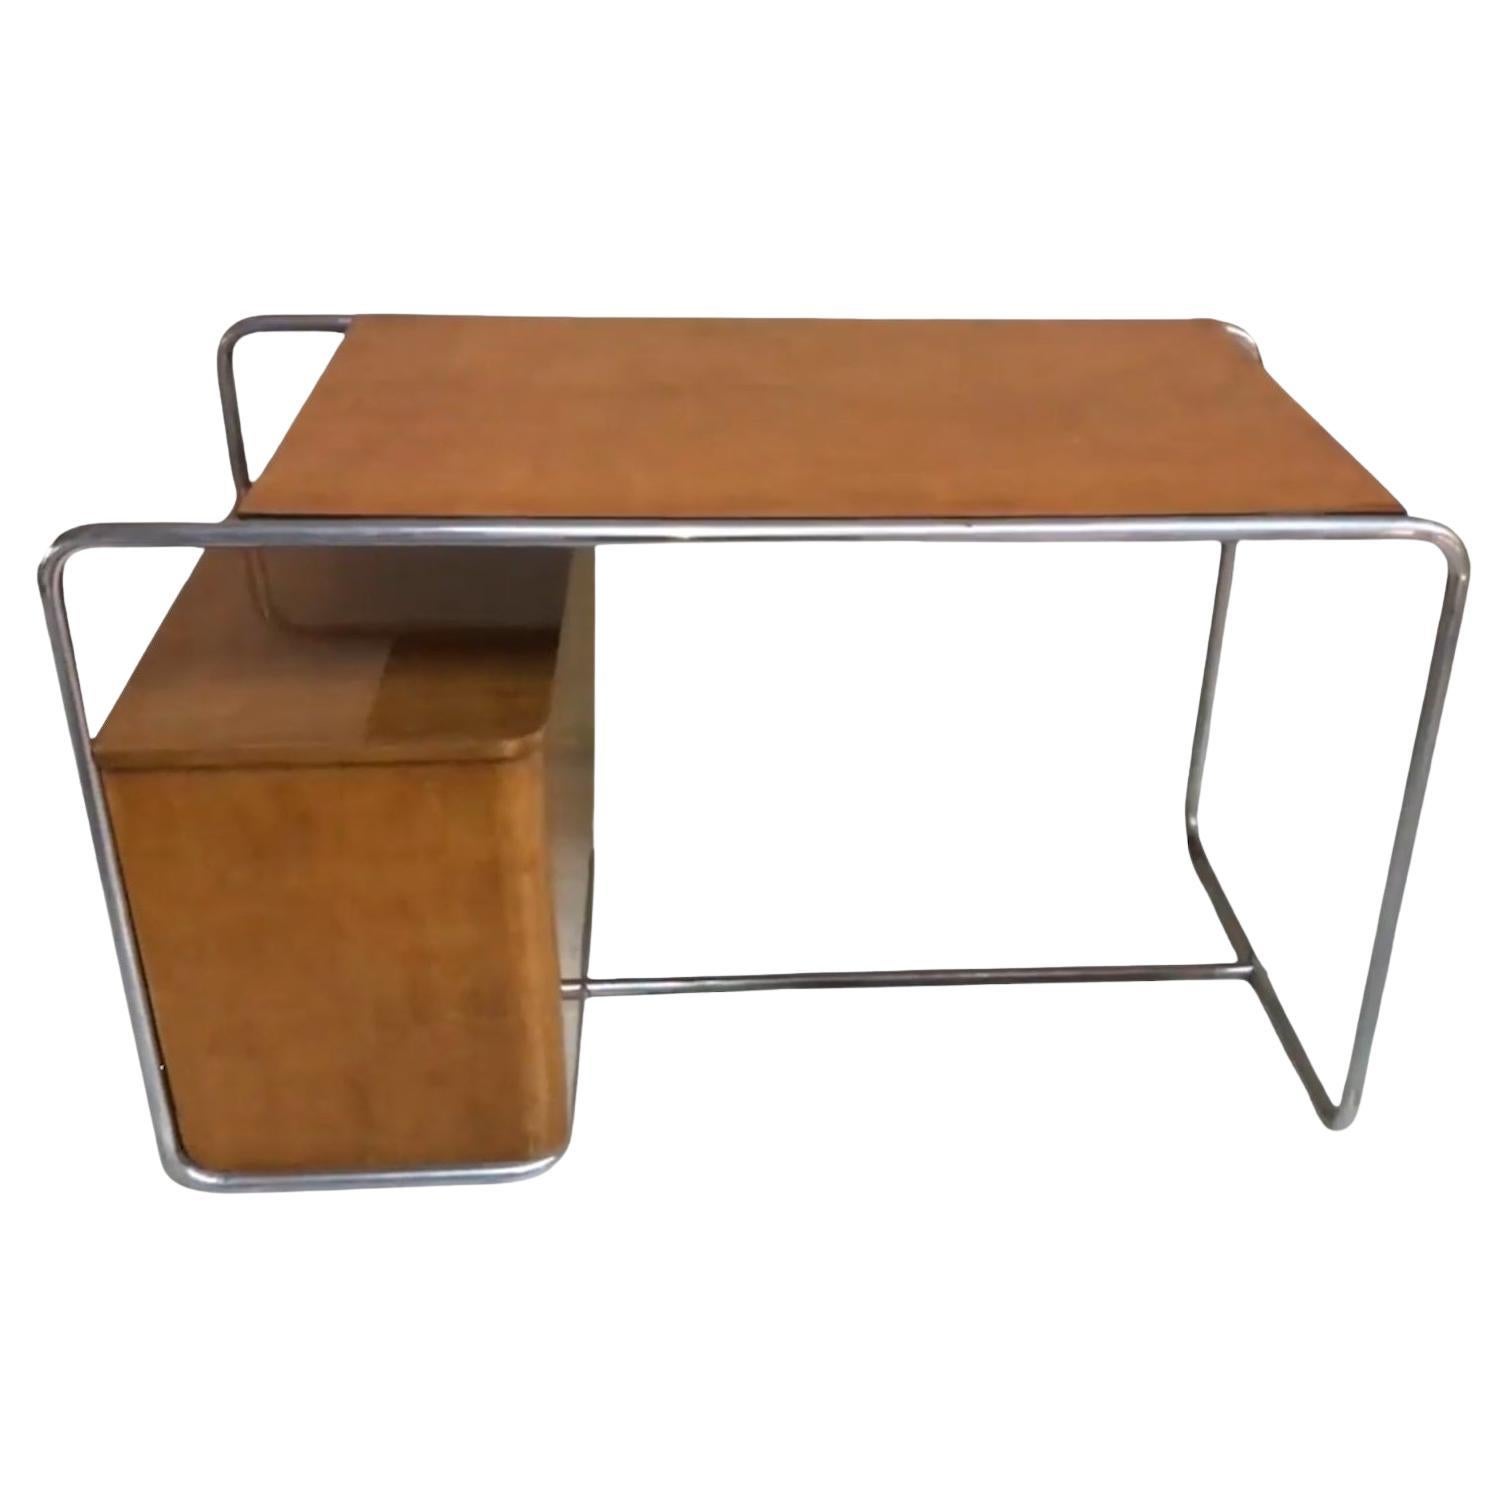 Desk Style Art Deco in Wood and chrome, 1940, Made in Germany For Sale